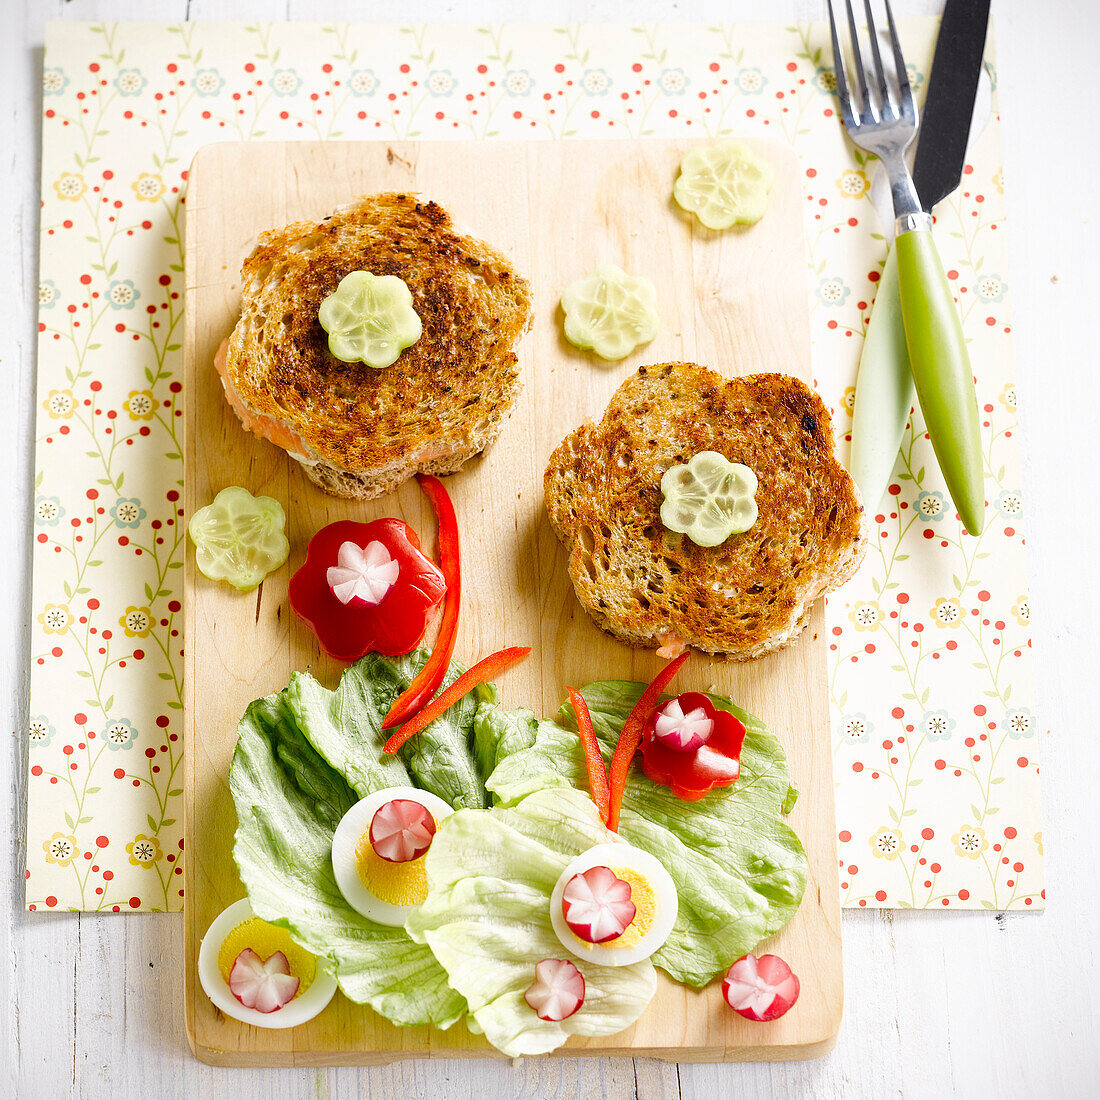 Flower-shaped Croque-monsieurs, toasted cheese and ham sandwiches